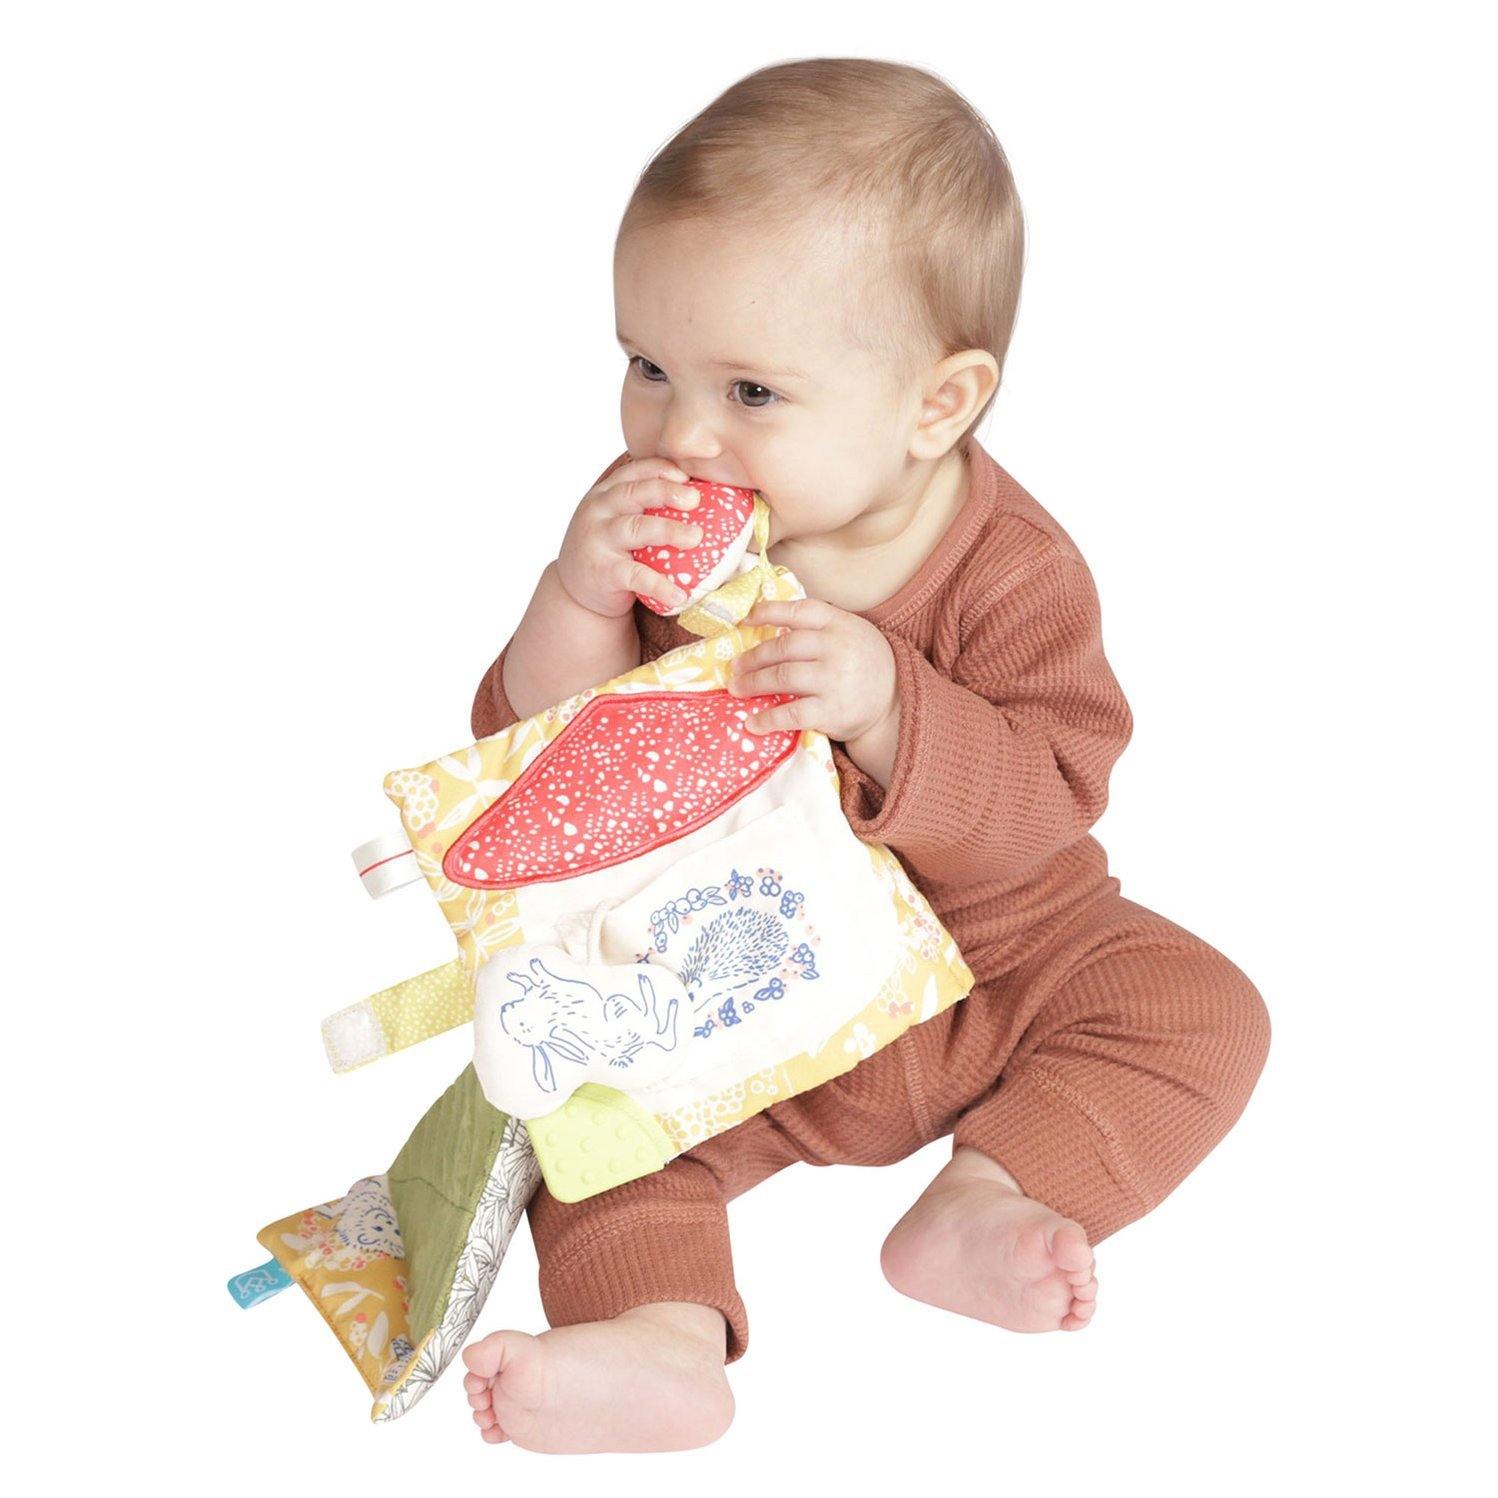 Baby chewing on Manhattan Toy Company Deer One Soft Book